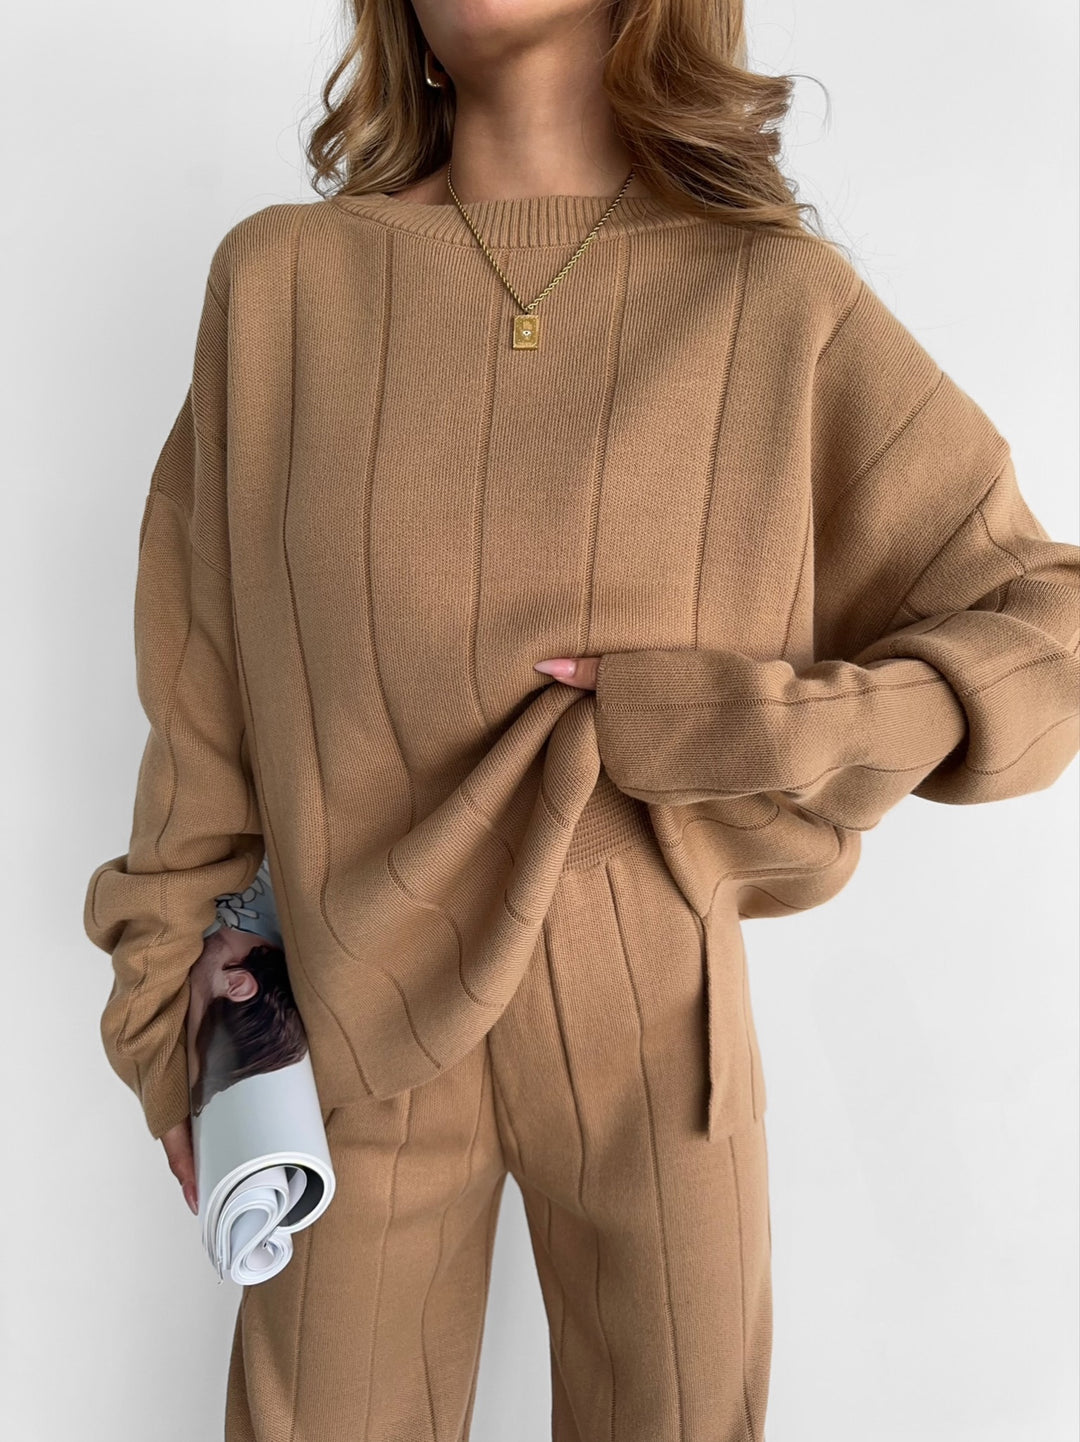 Knit Textured Sweater - Brown